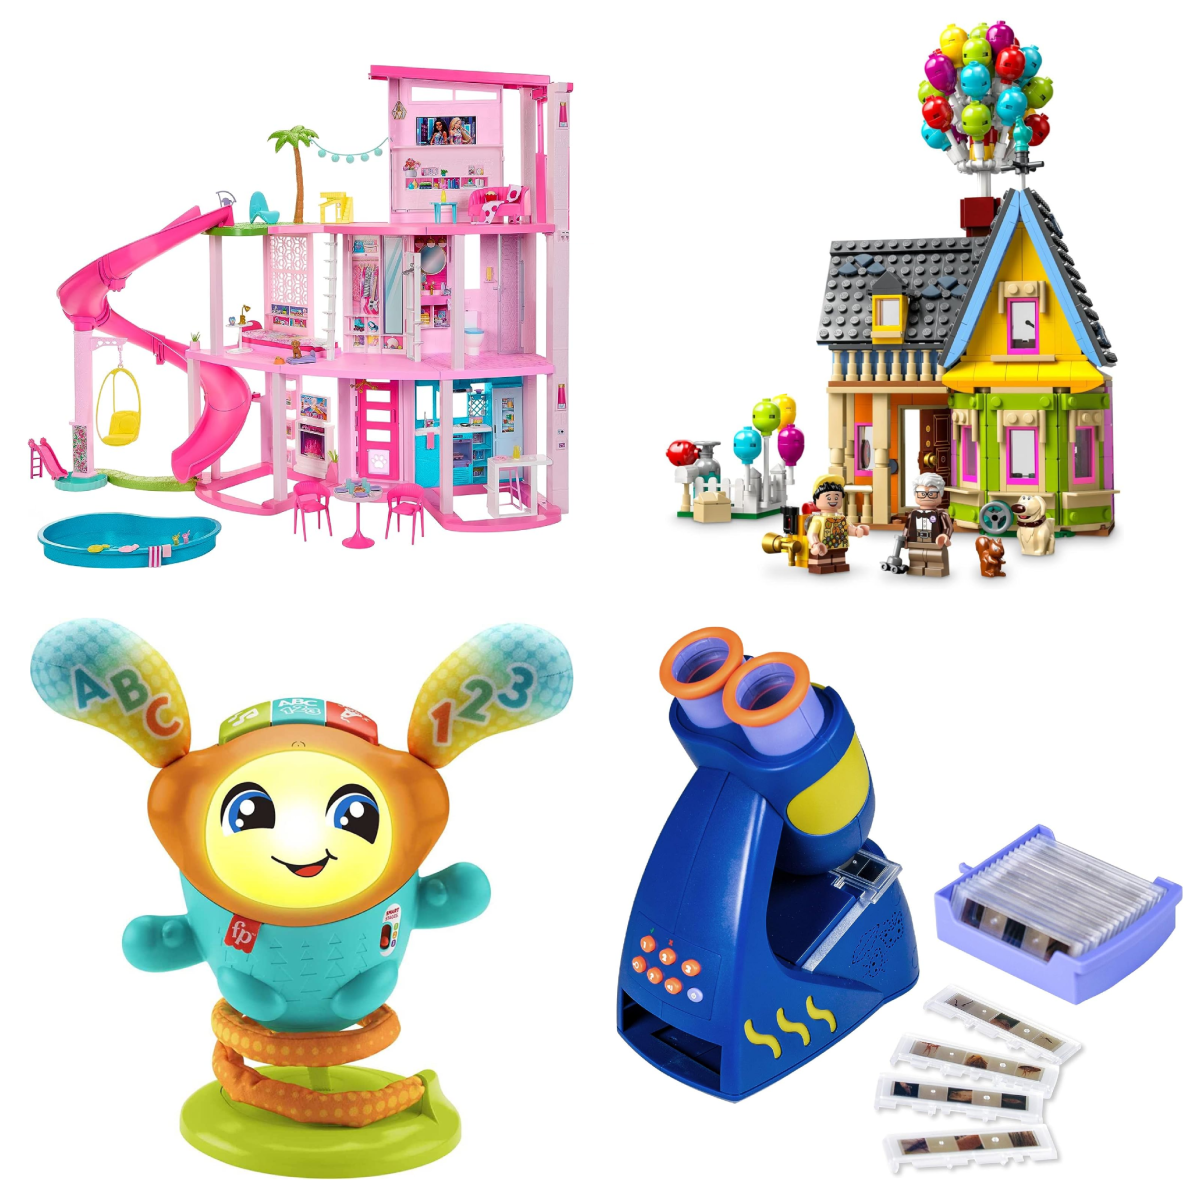 Hottest toys 2023: Here's what to shop for the holidays this year